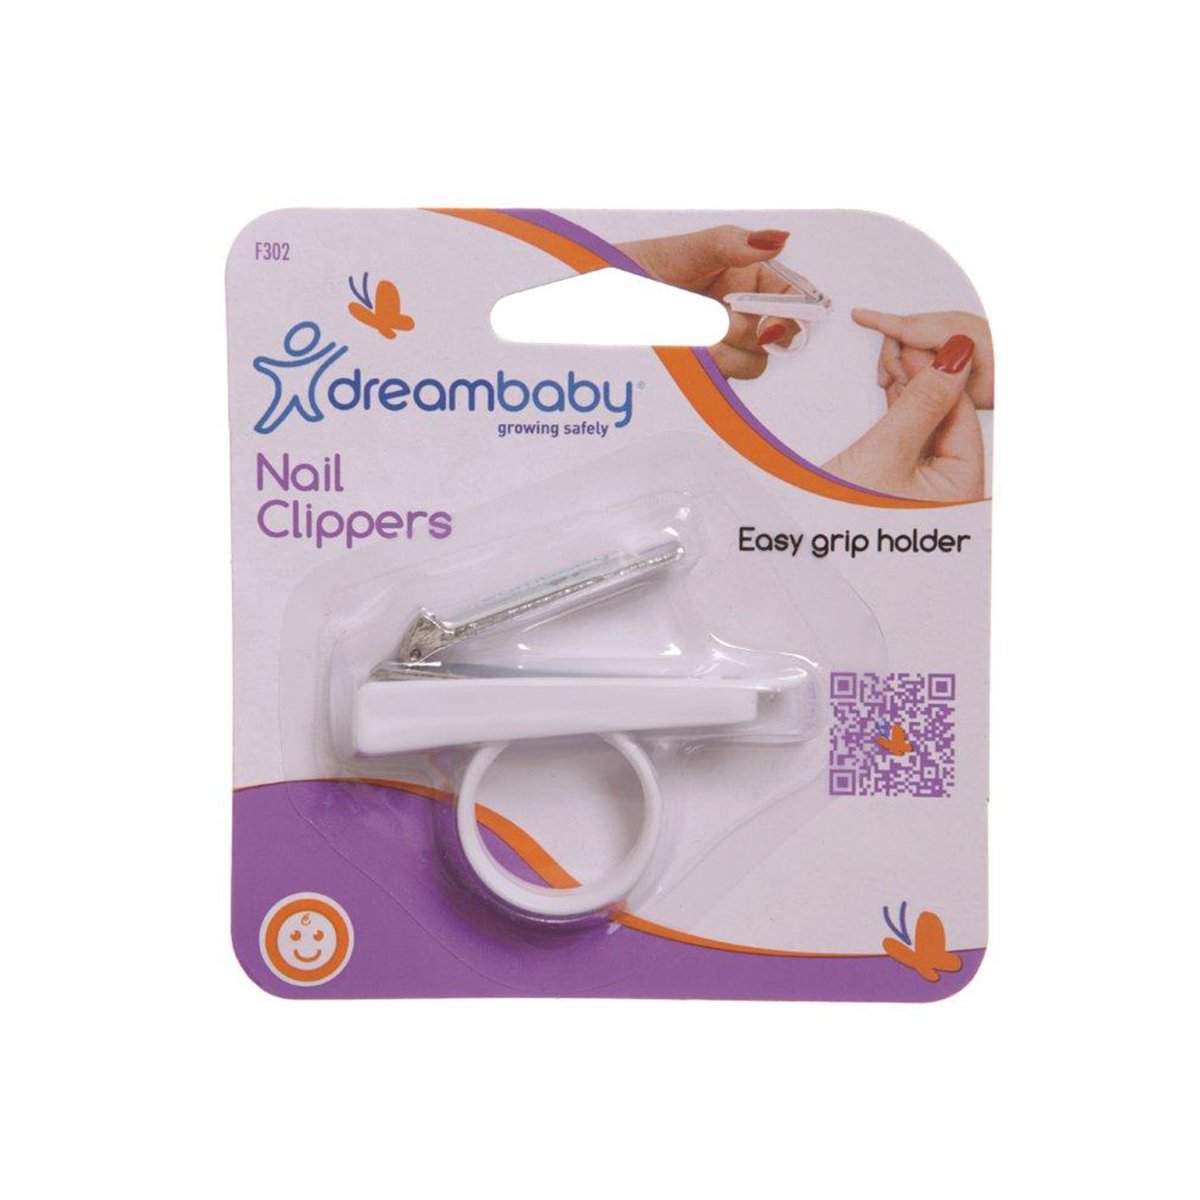 Dreambaby Nail Clipper with Holder - 309890